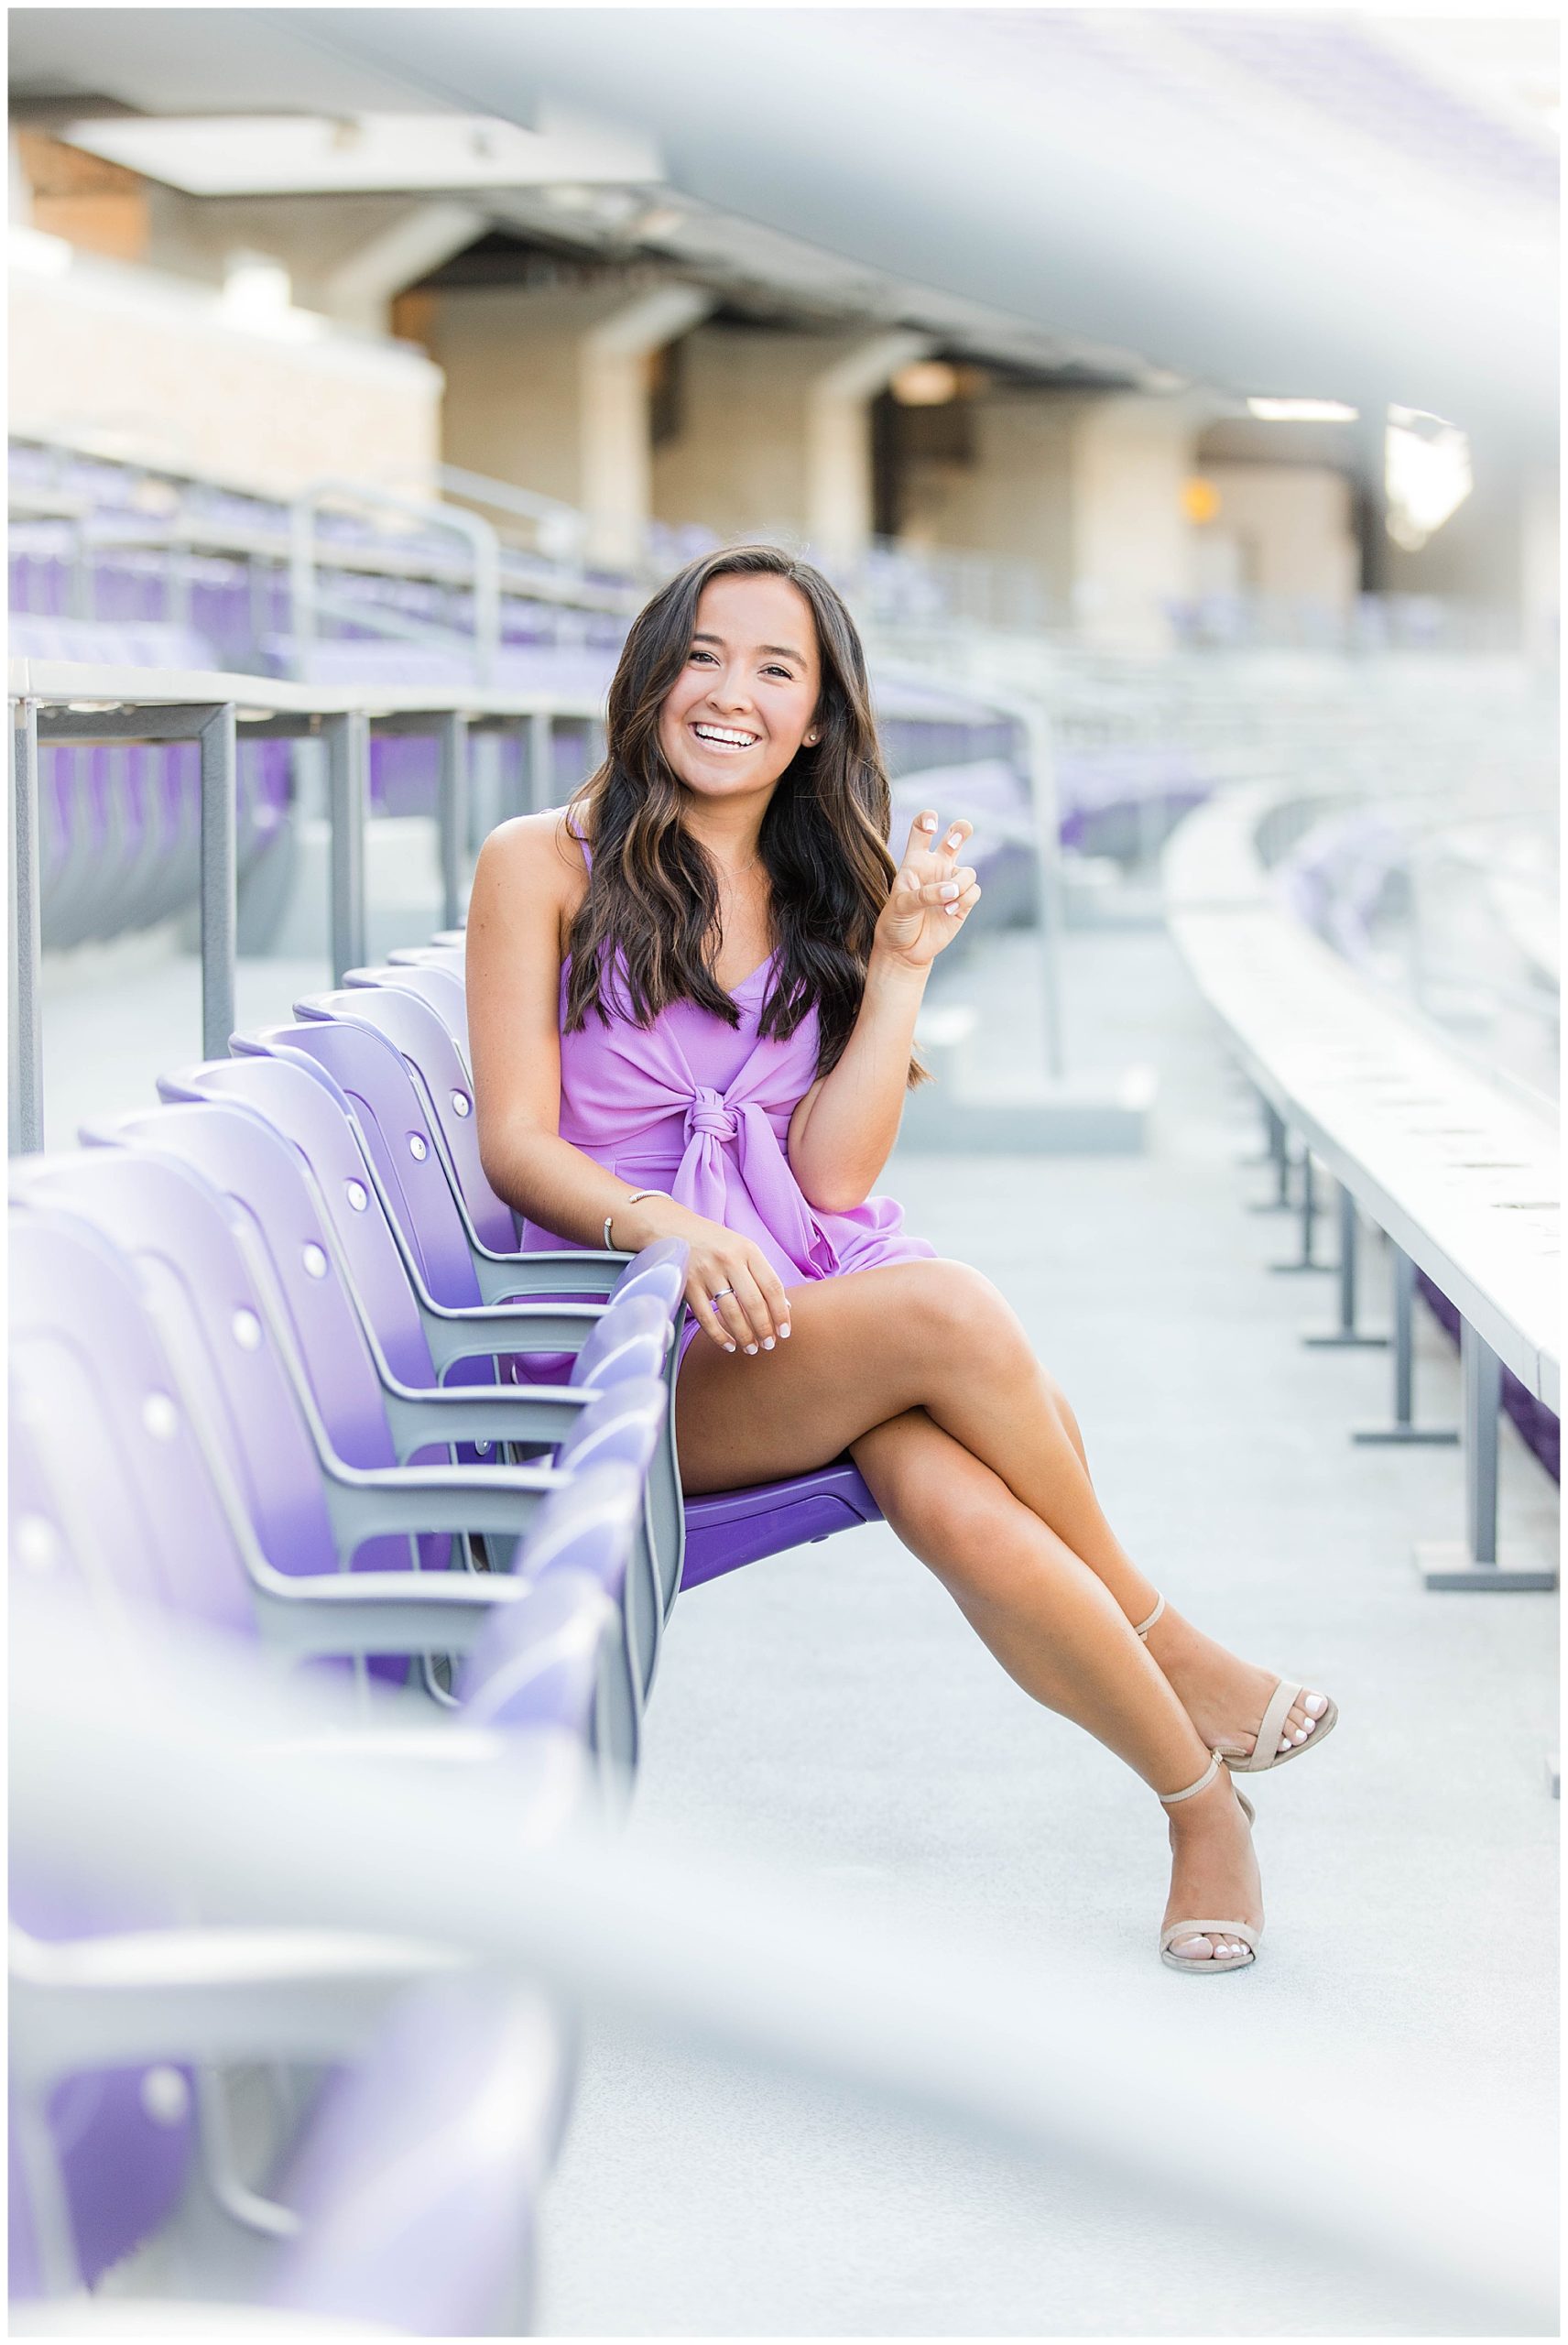 Image of TCU Senior Photos in Football Stands